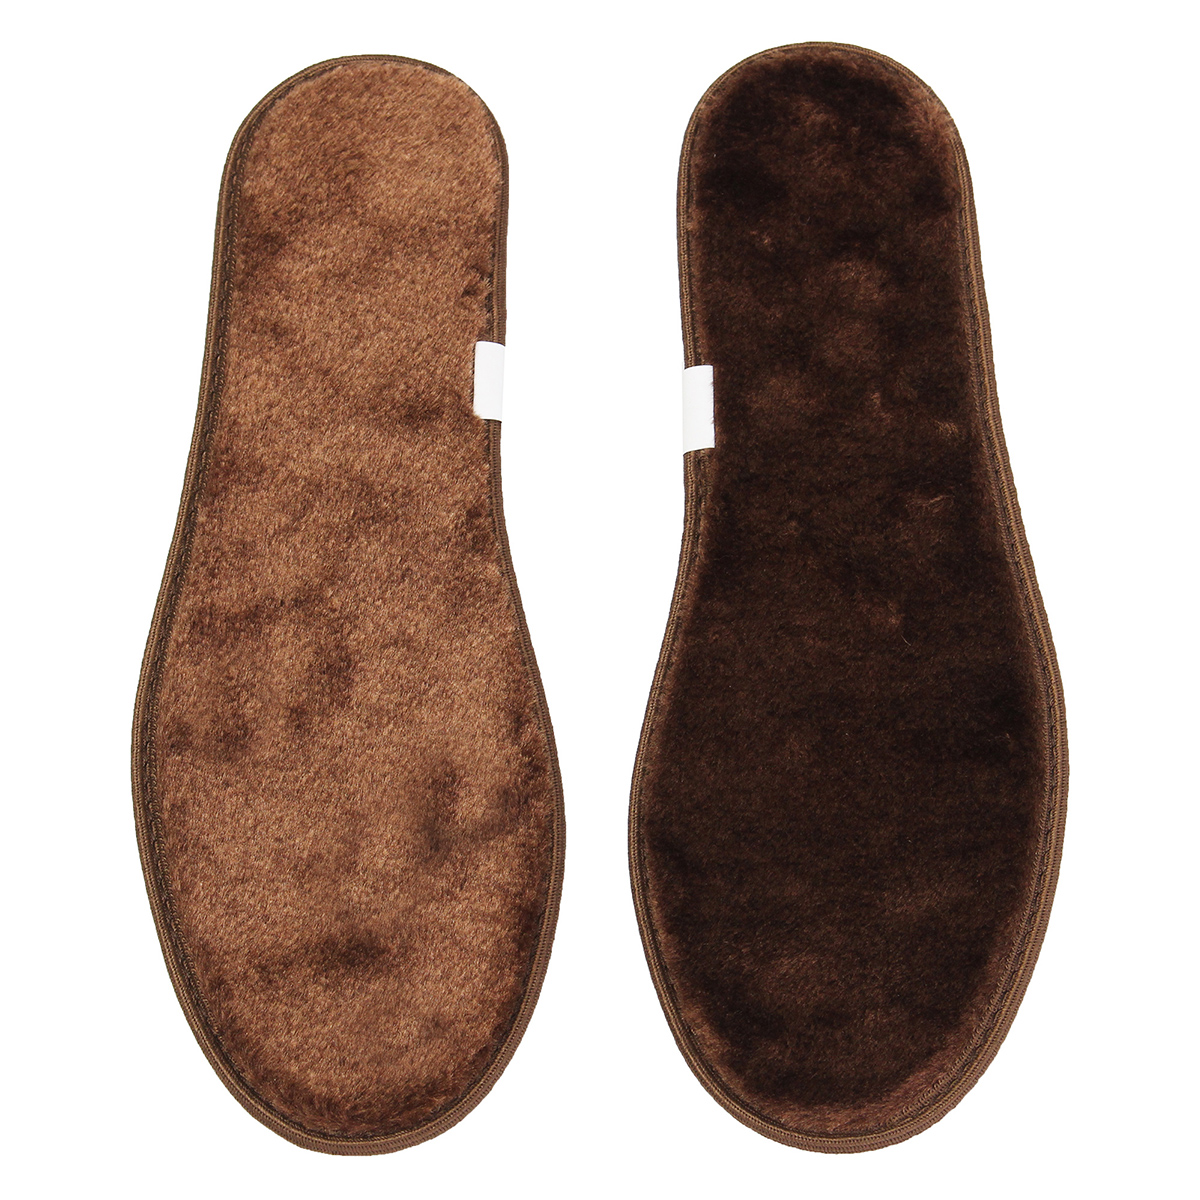 1-Pair-Unisex-Bamboo-Carbon-Deodorant-Insoles-Pads-Inner-Soles-Winter-Warmer-1111705-5